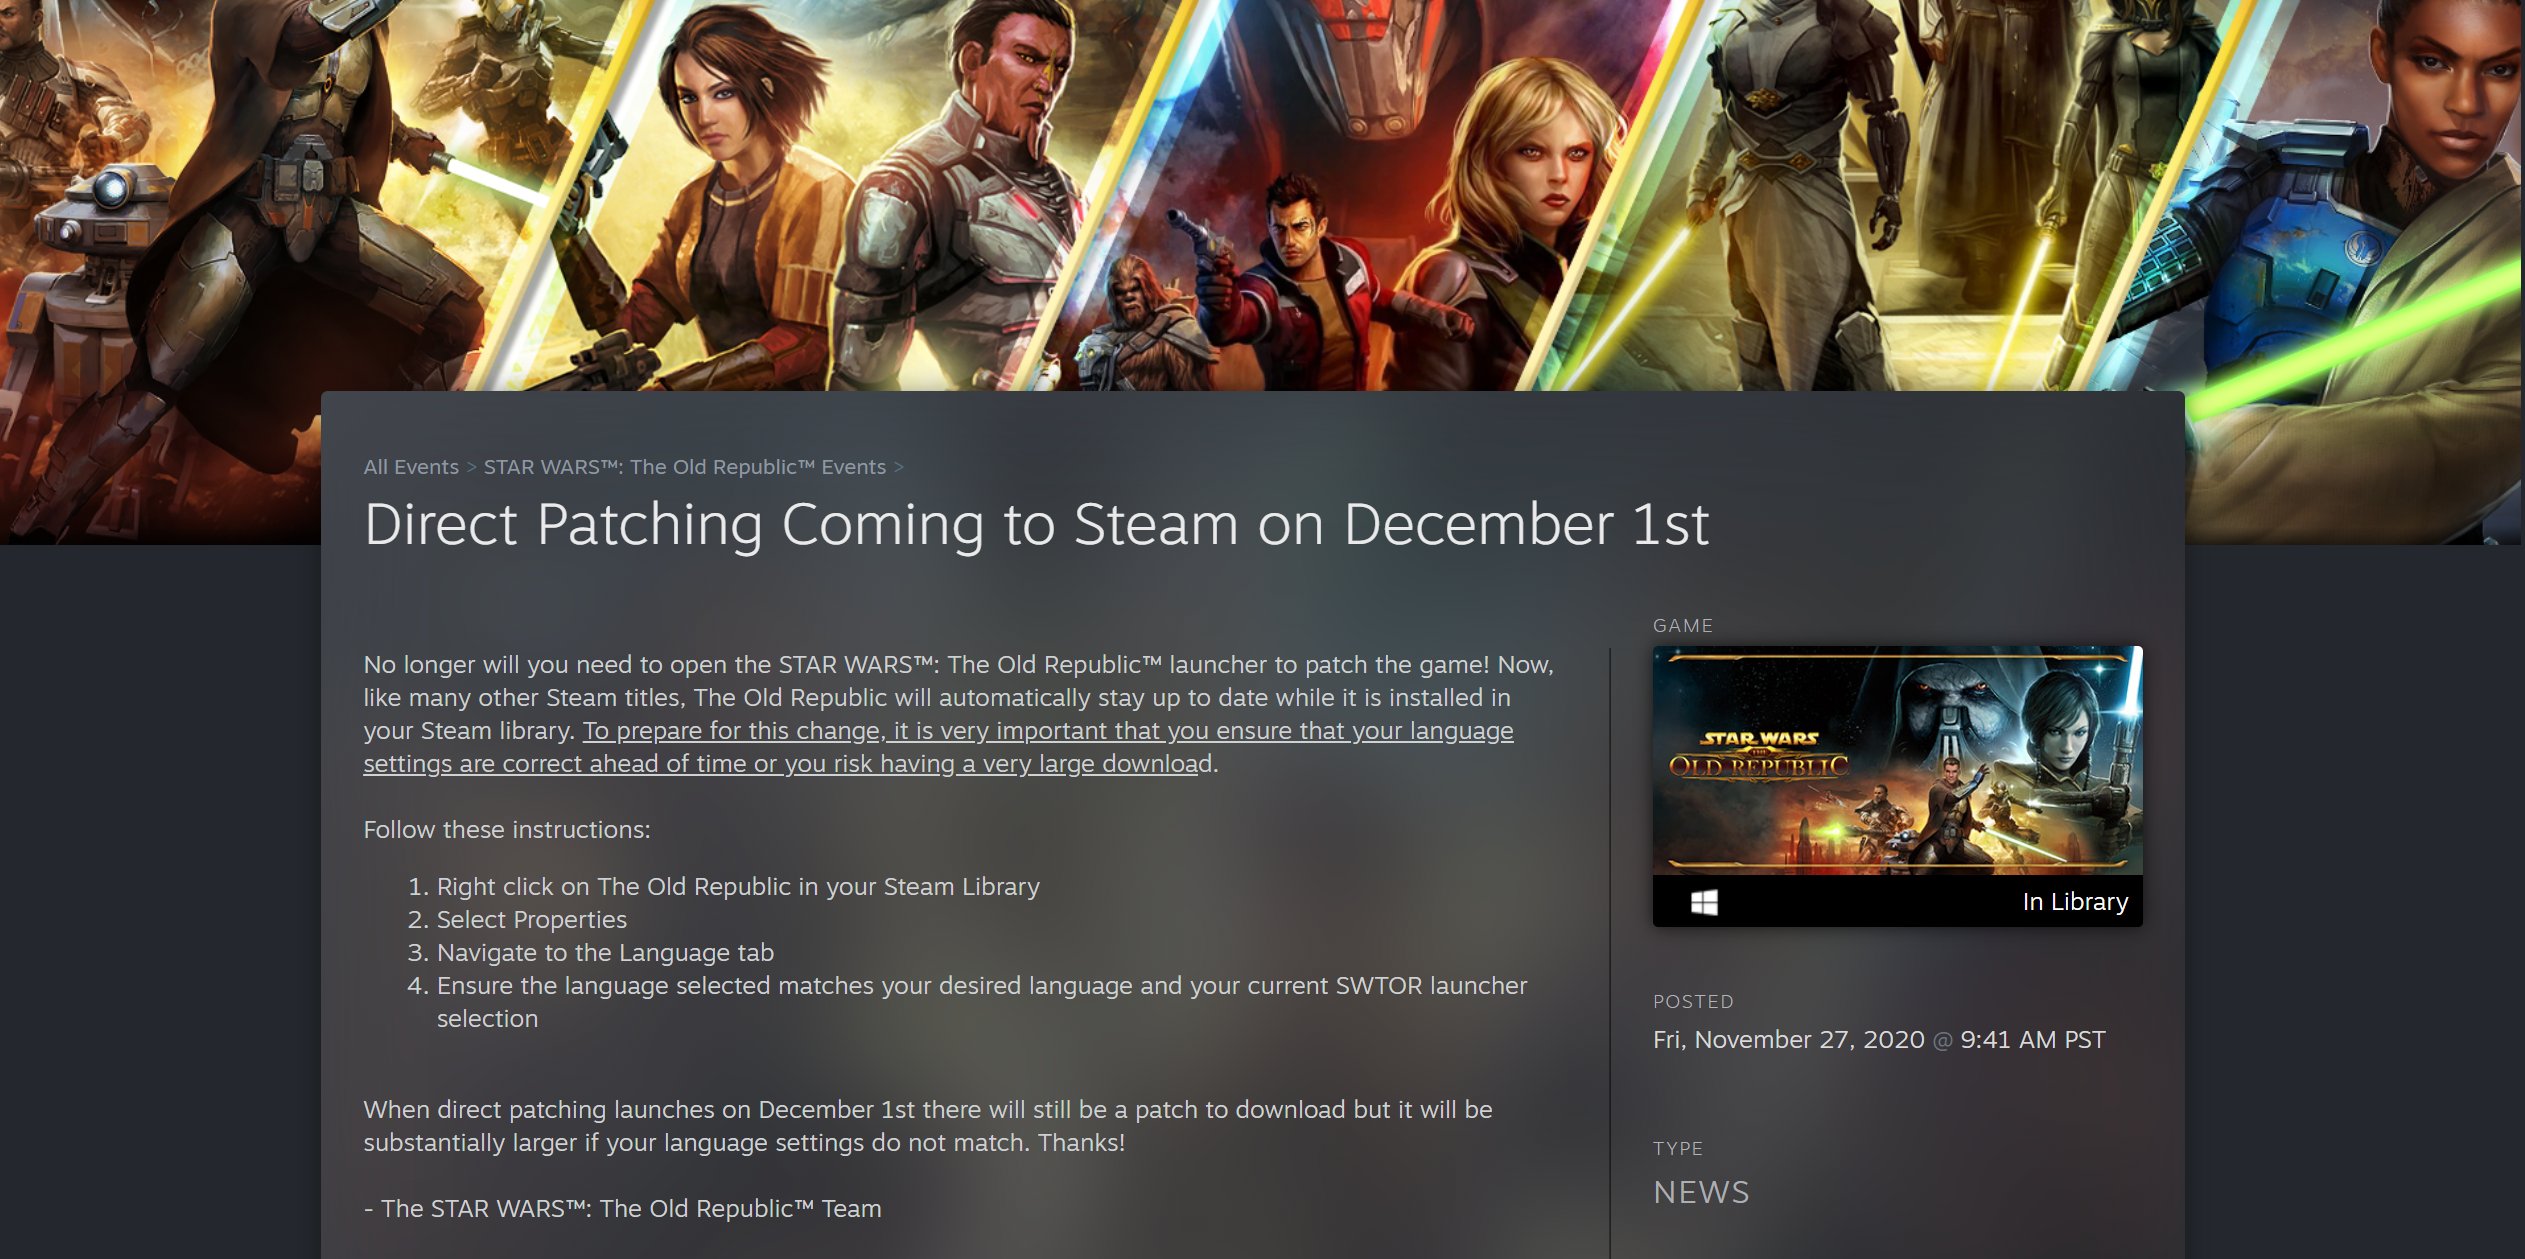 Swtorista on Twitter: "Good news for #SWTOR Steam players! Direct Patching is coming Steam on December "No longer will need to open launcher to patch the game! Now,